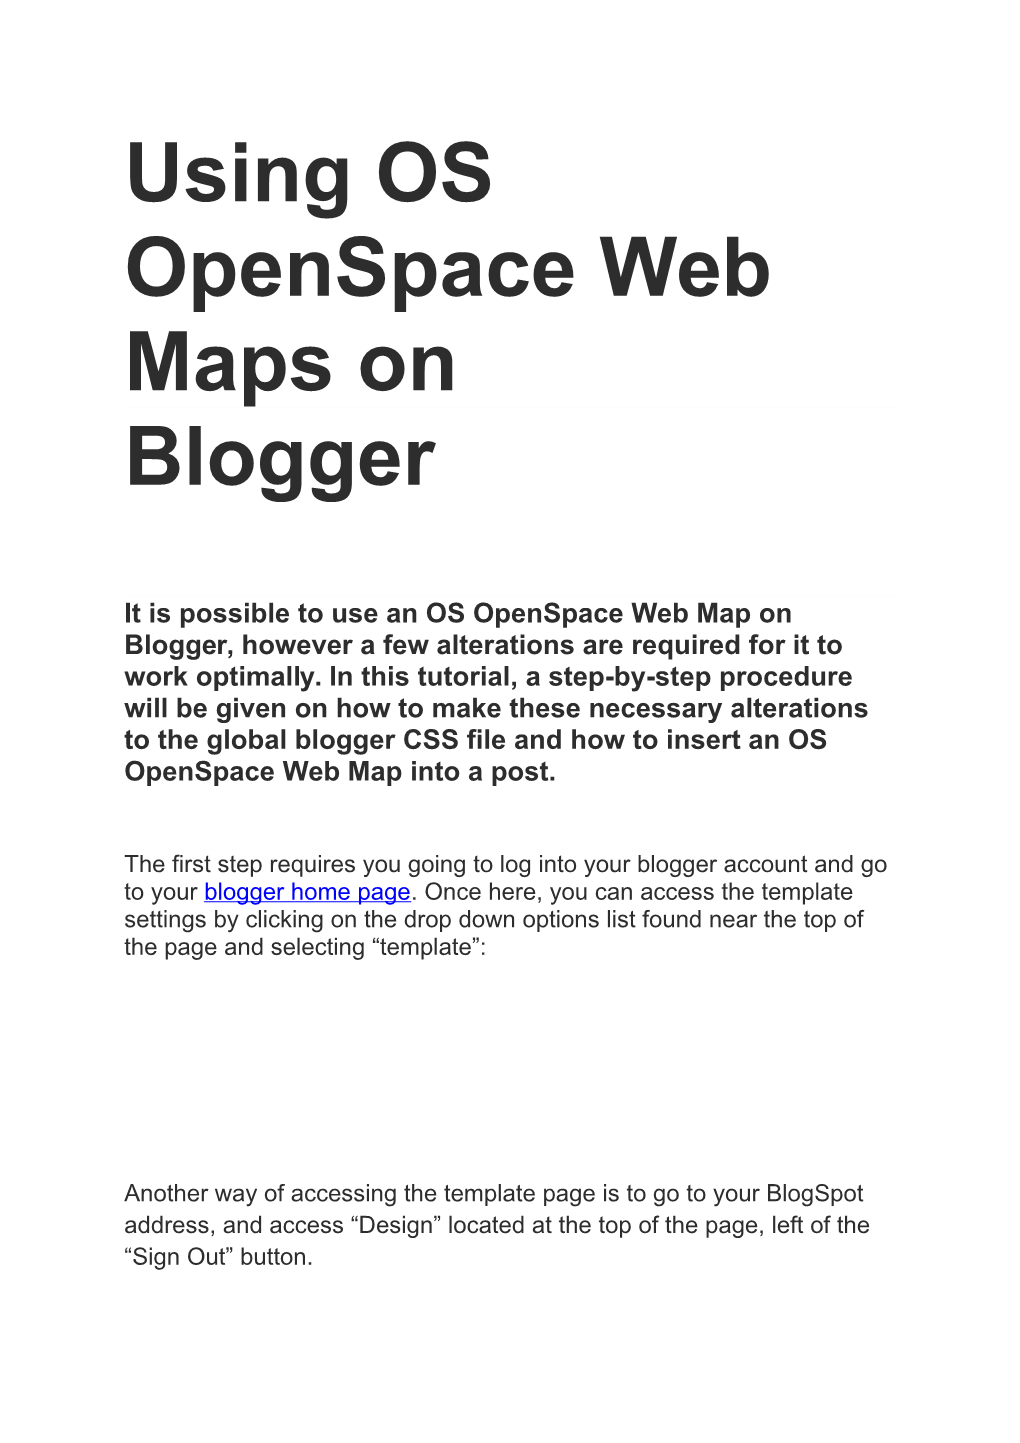 Using OS Openspace Web Maps On